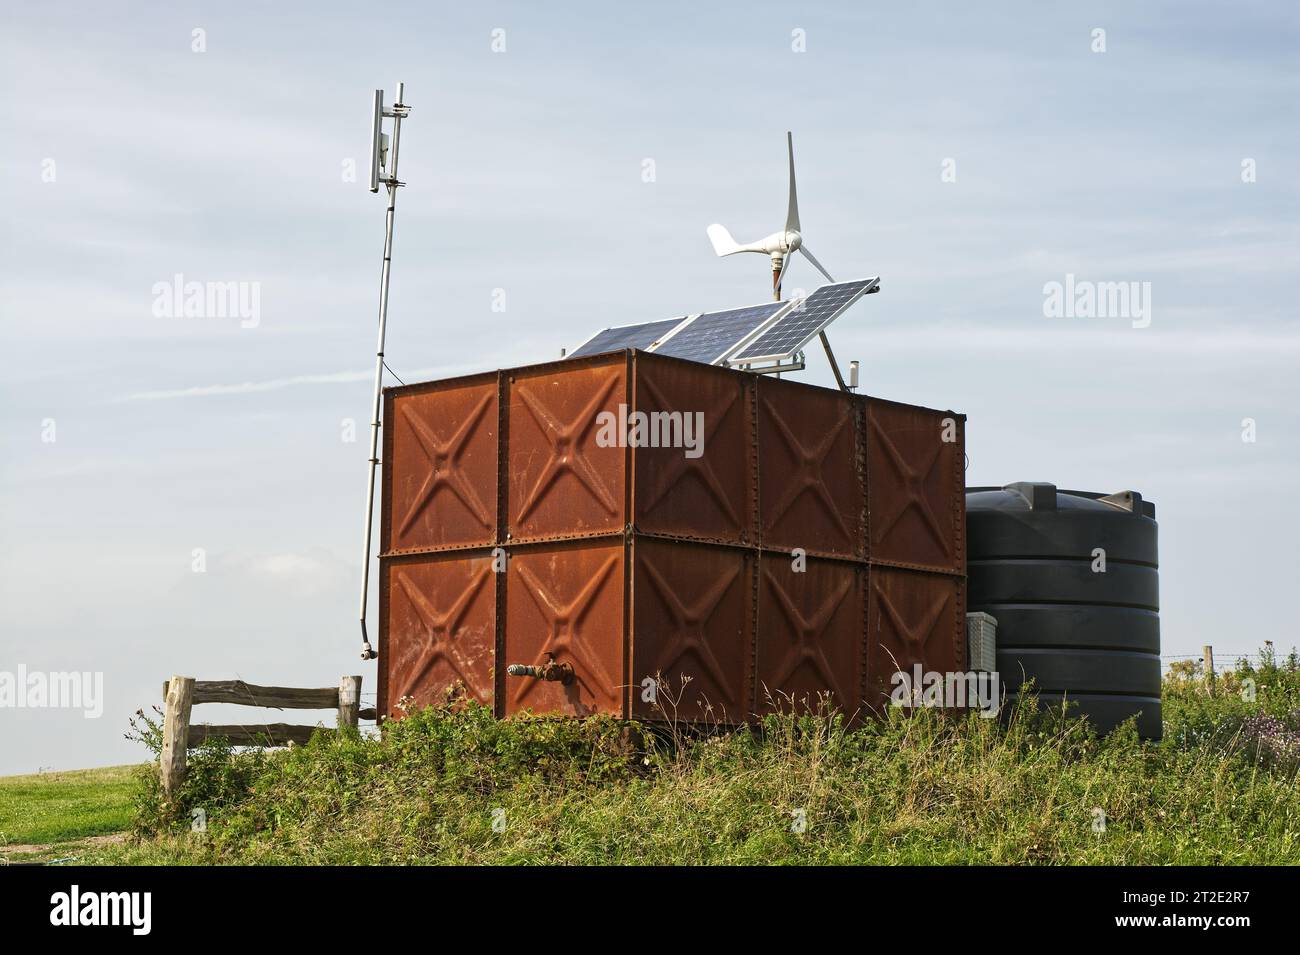 Photovoltaic solar panels and wind powered generator on water tanks in rural location. England. Stock Photo